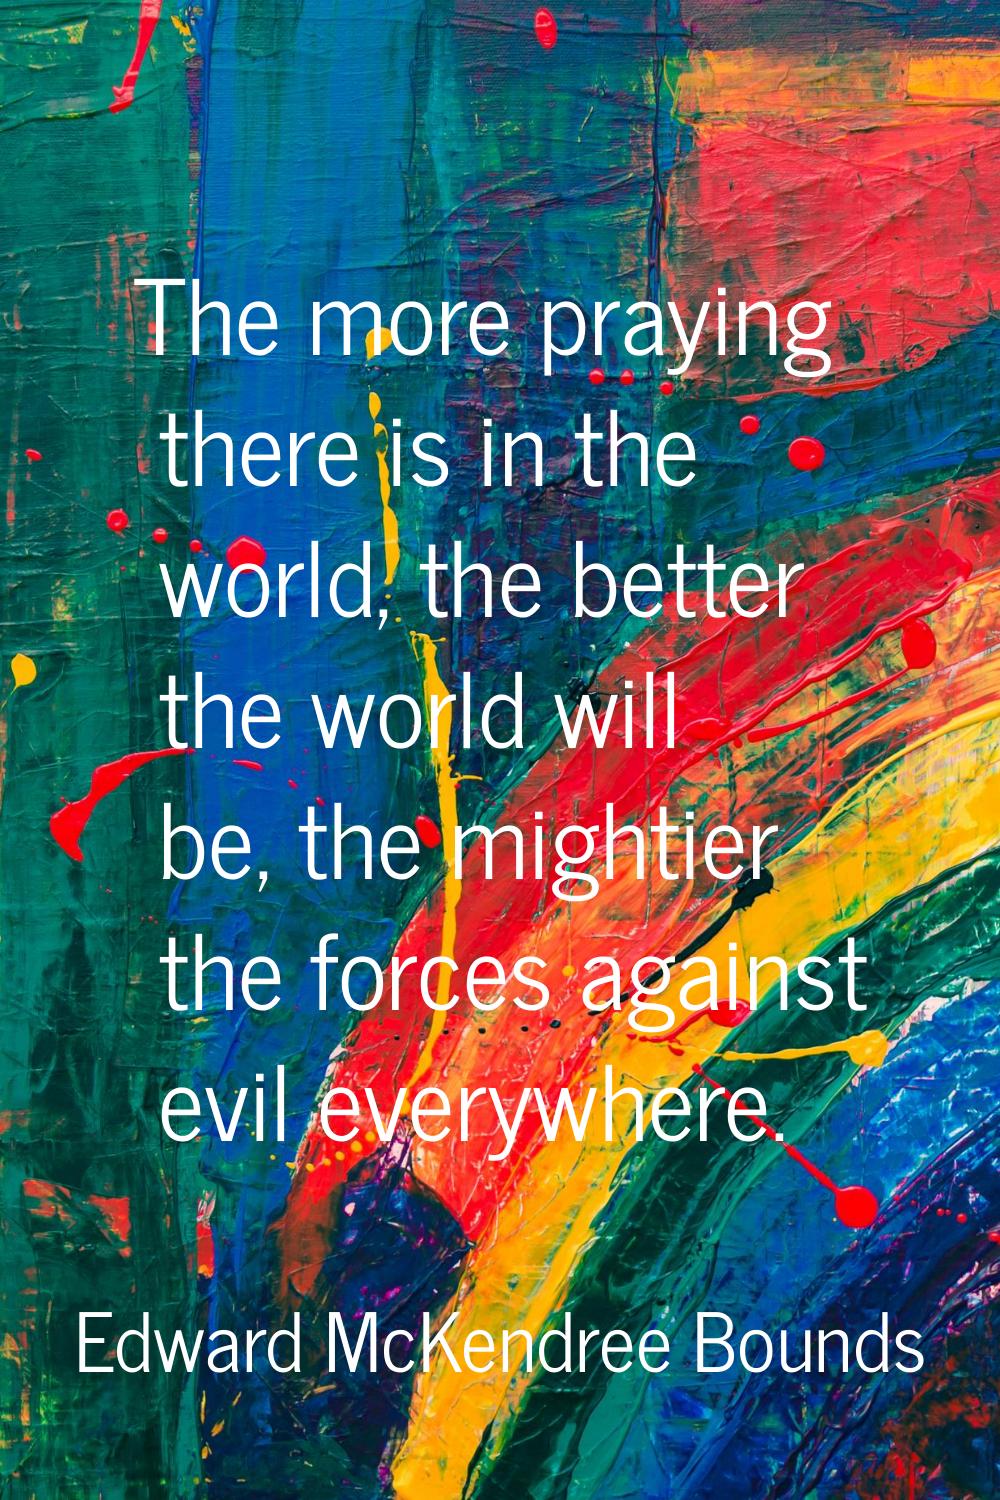 The more praying there is in the world, the better the world will be, the mightier the forces again